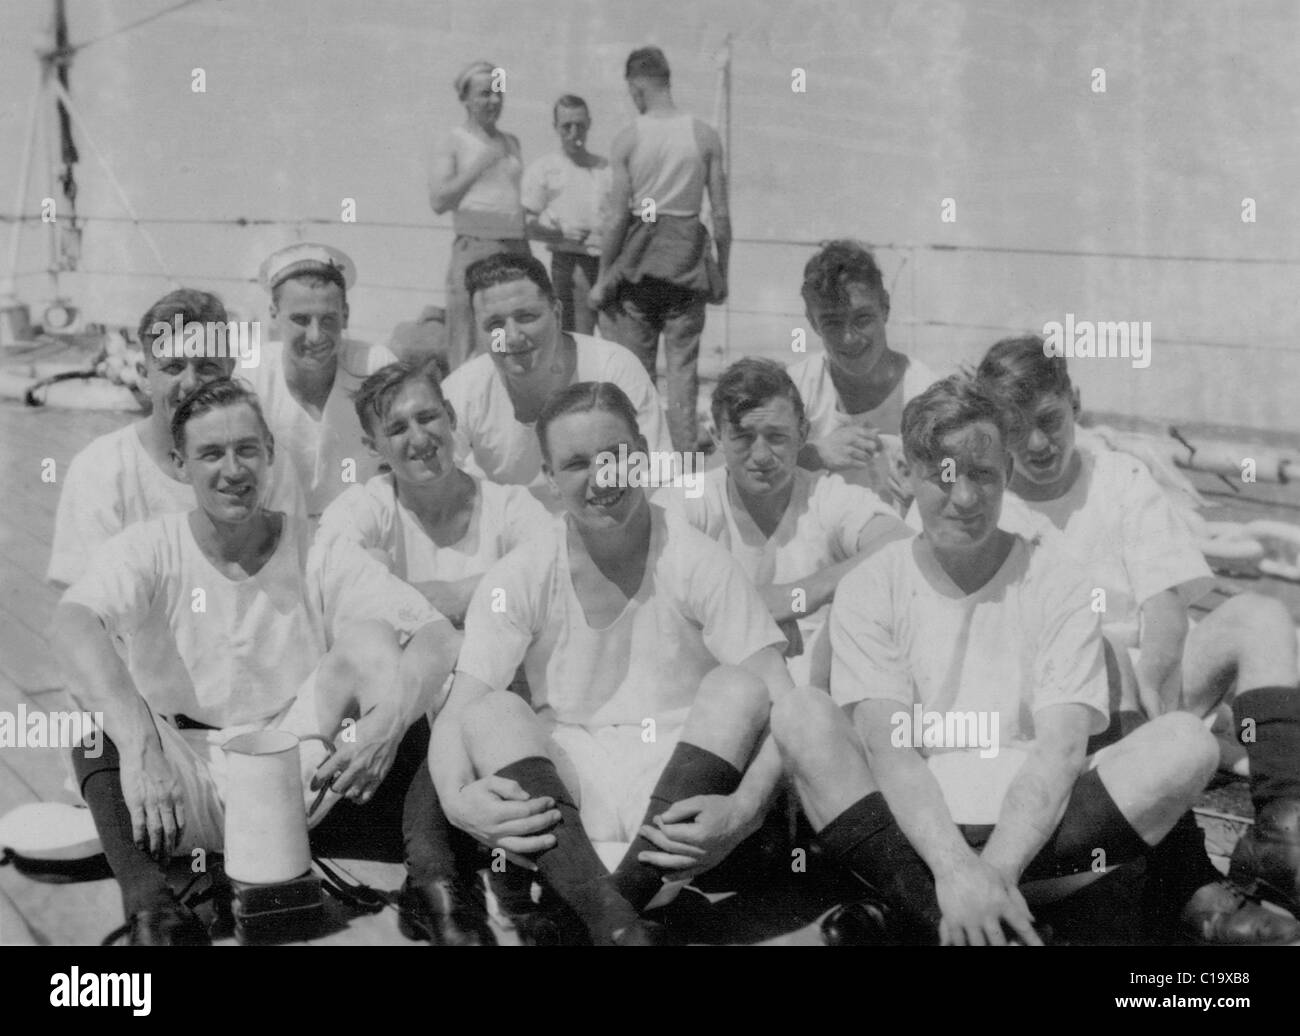 Informal group portrait of British Royal Navy sailors in tropical clothing thought to be HMS Adventure 1936-37 Stock Photo